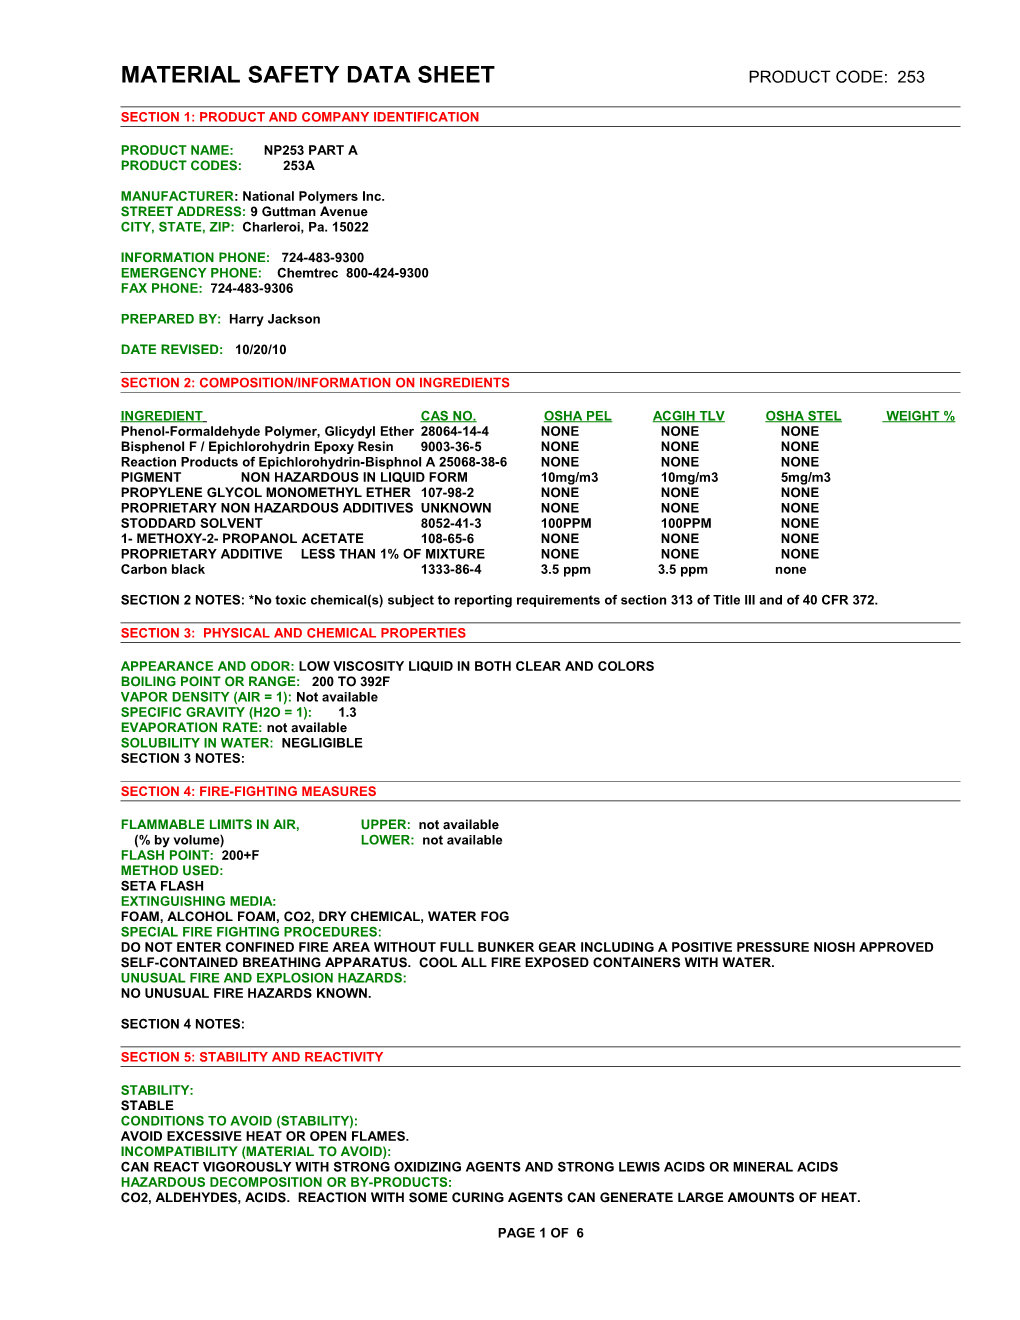 Material Safety Data Sheet Page 1 of X s6